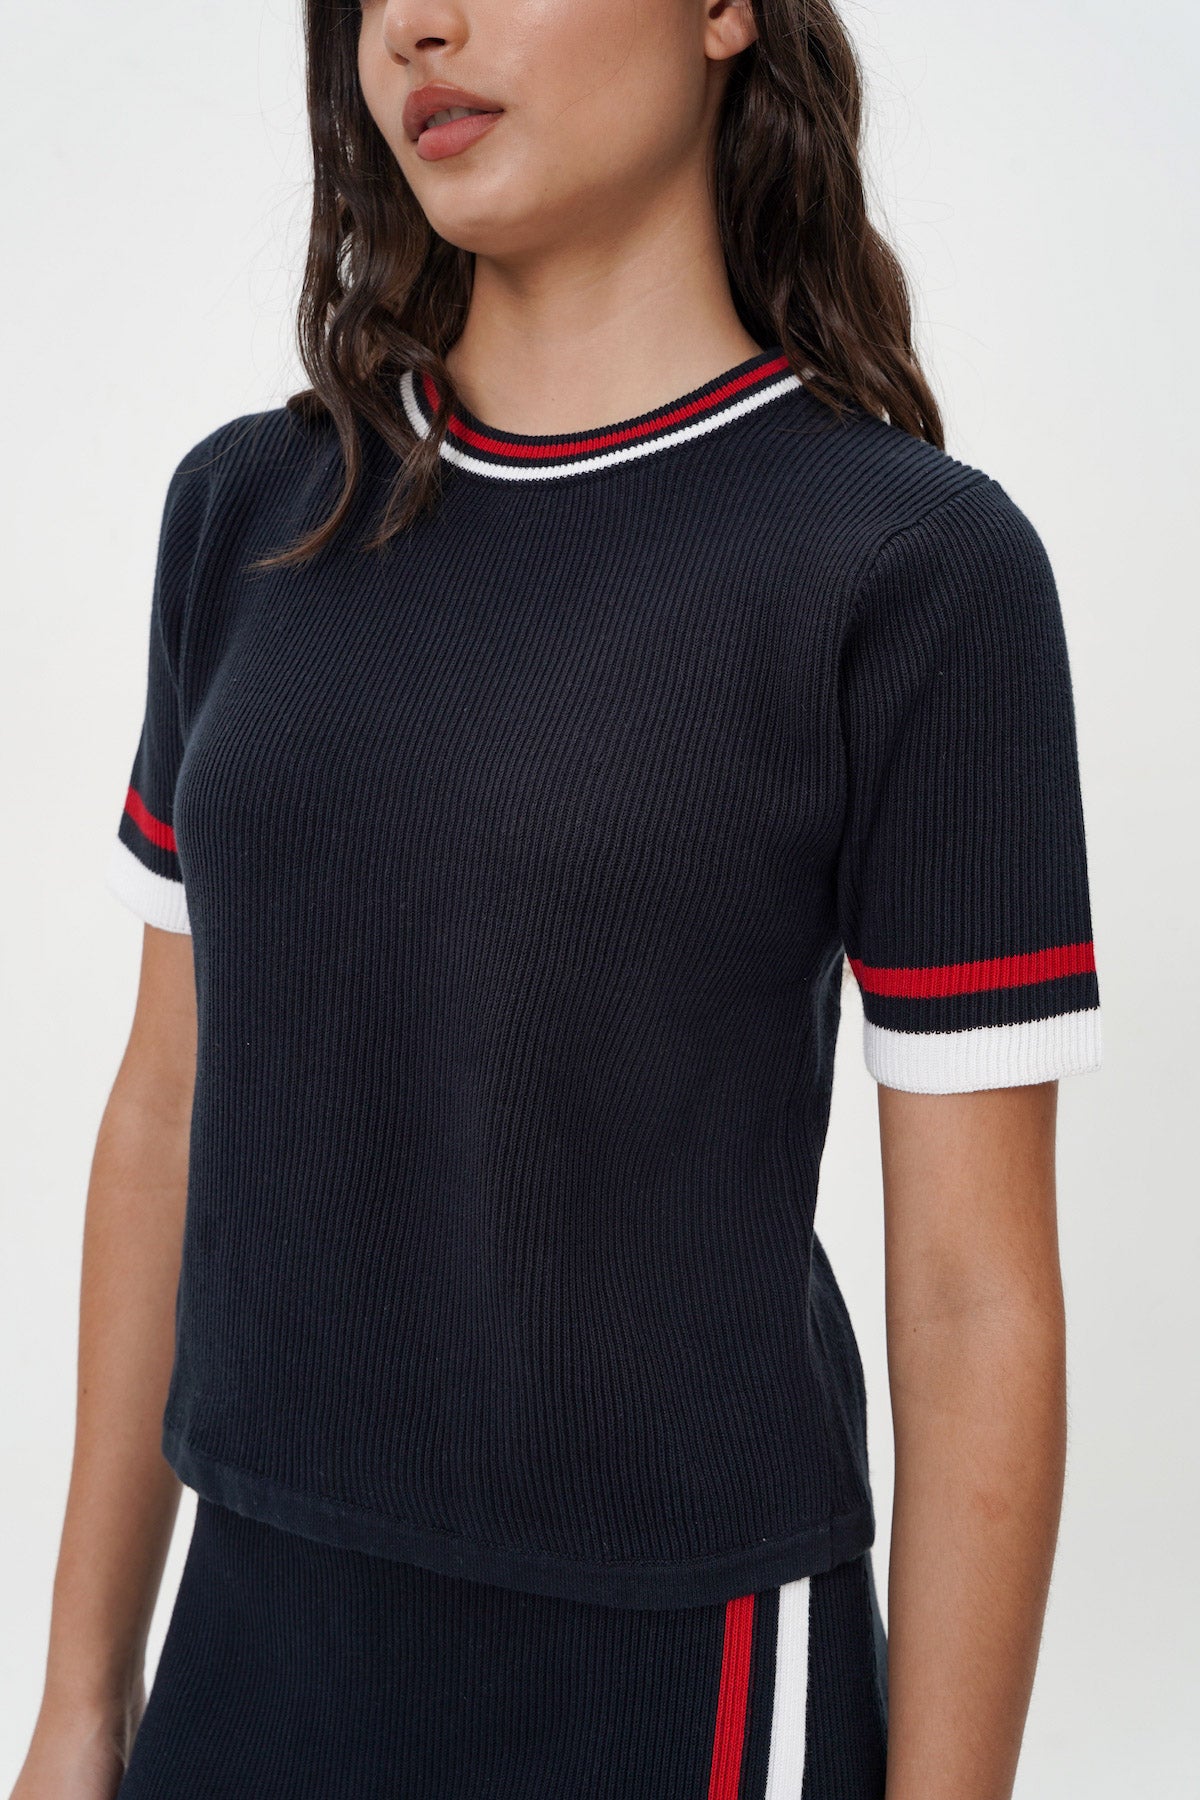 Kyle Knit Top in Navy